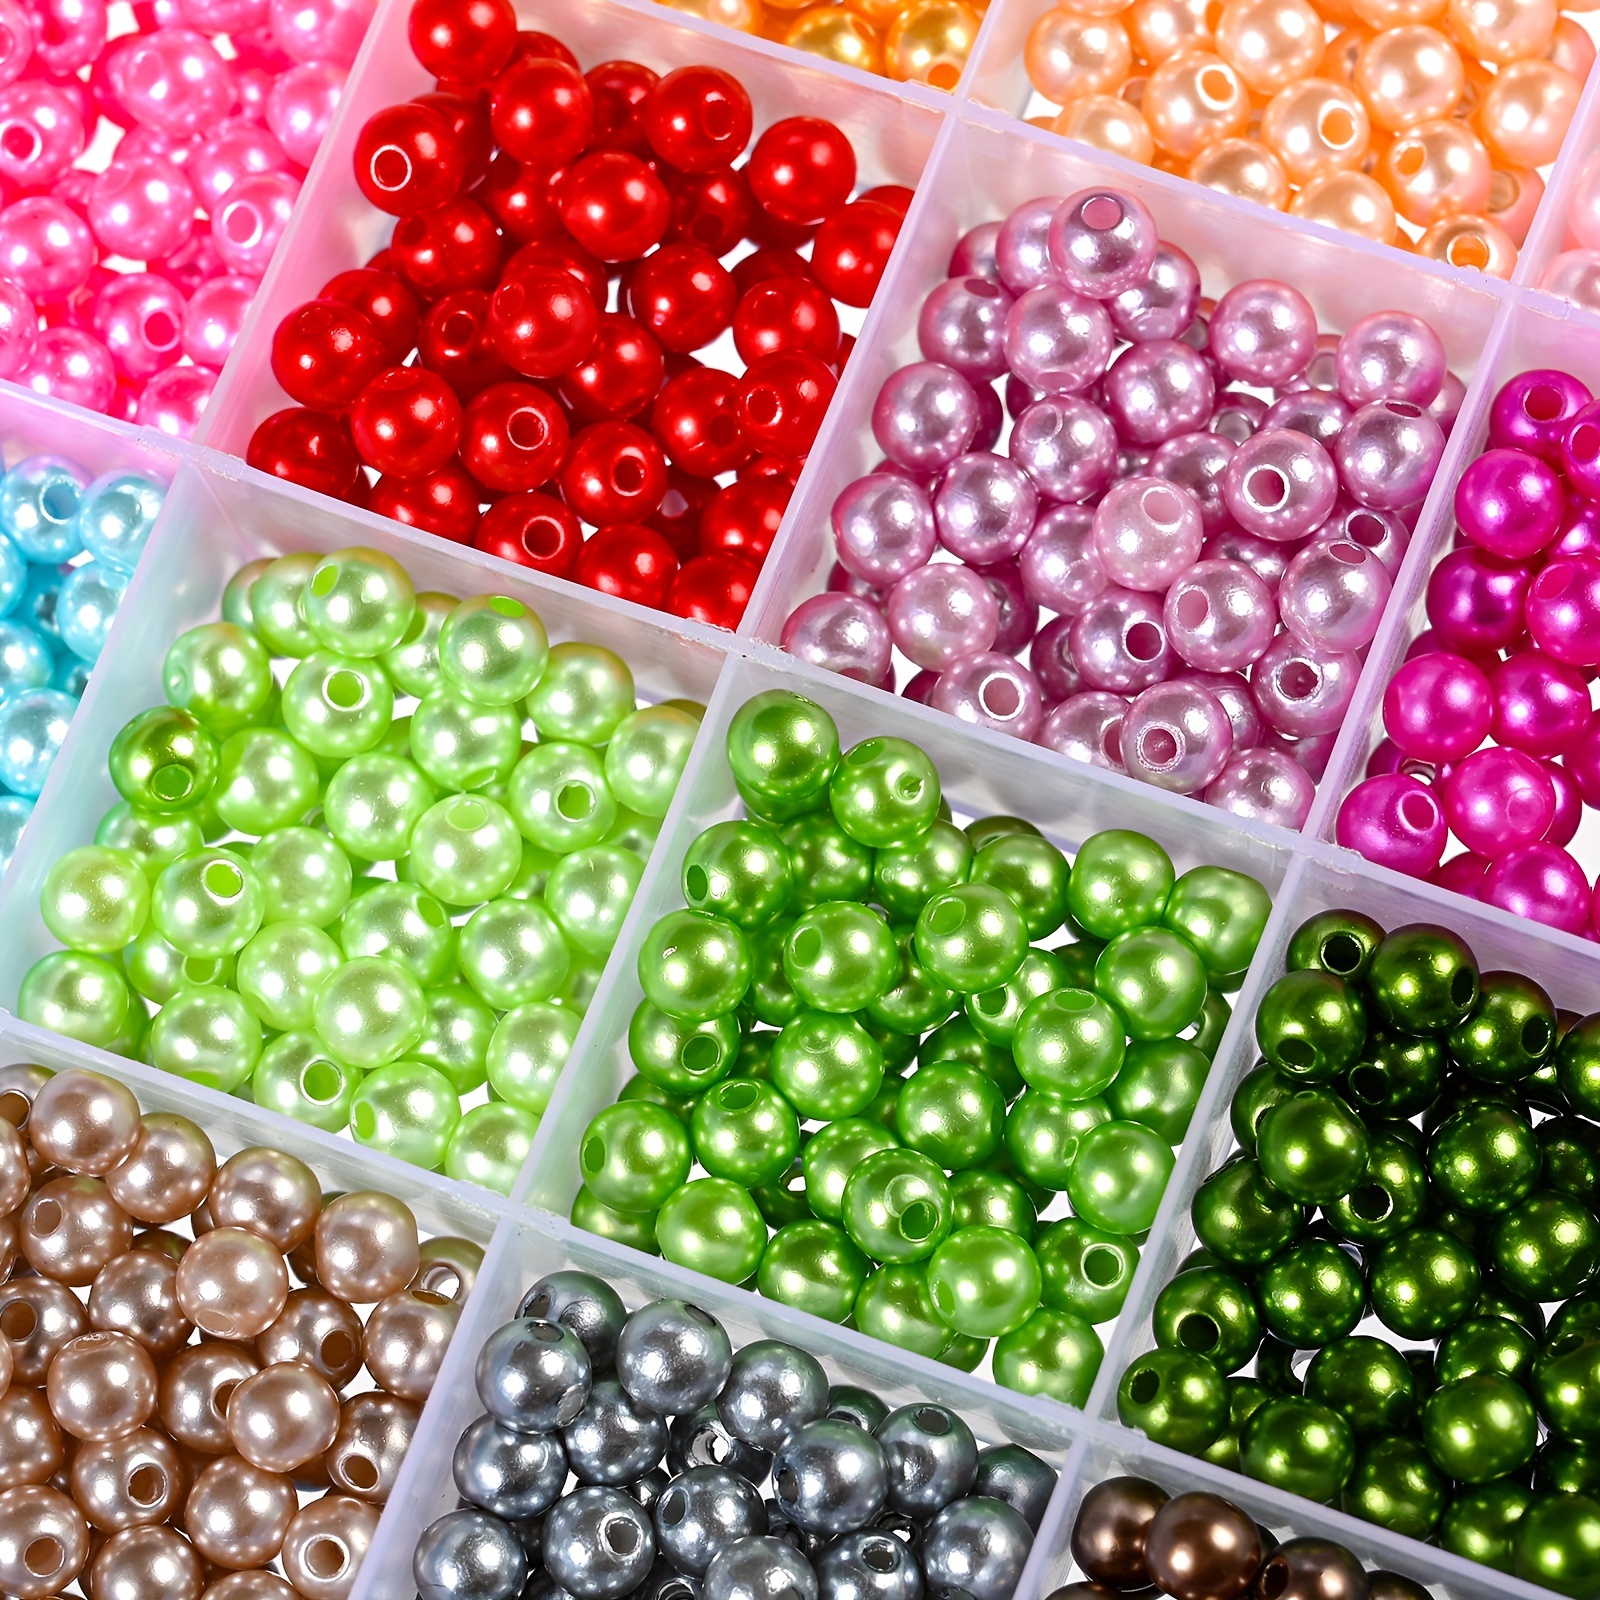 2000Pcs Bubble Beads for Bracelets Making - Assorted Beads for Jewelry  Making Supplies Plastic Beads for Hair Beads For Braids - Colorful Beads  Charms